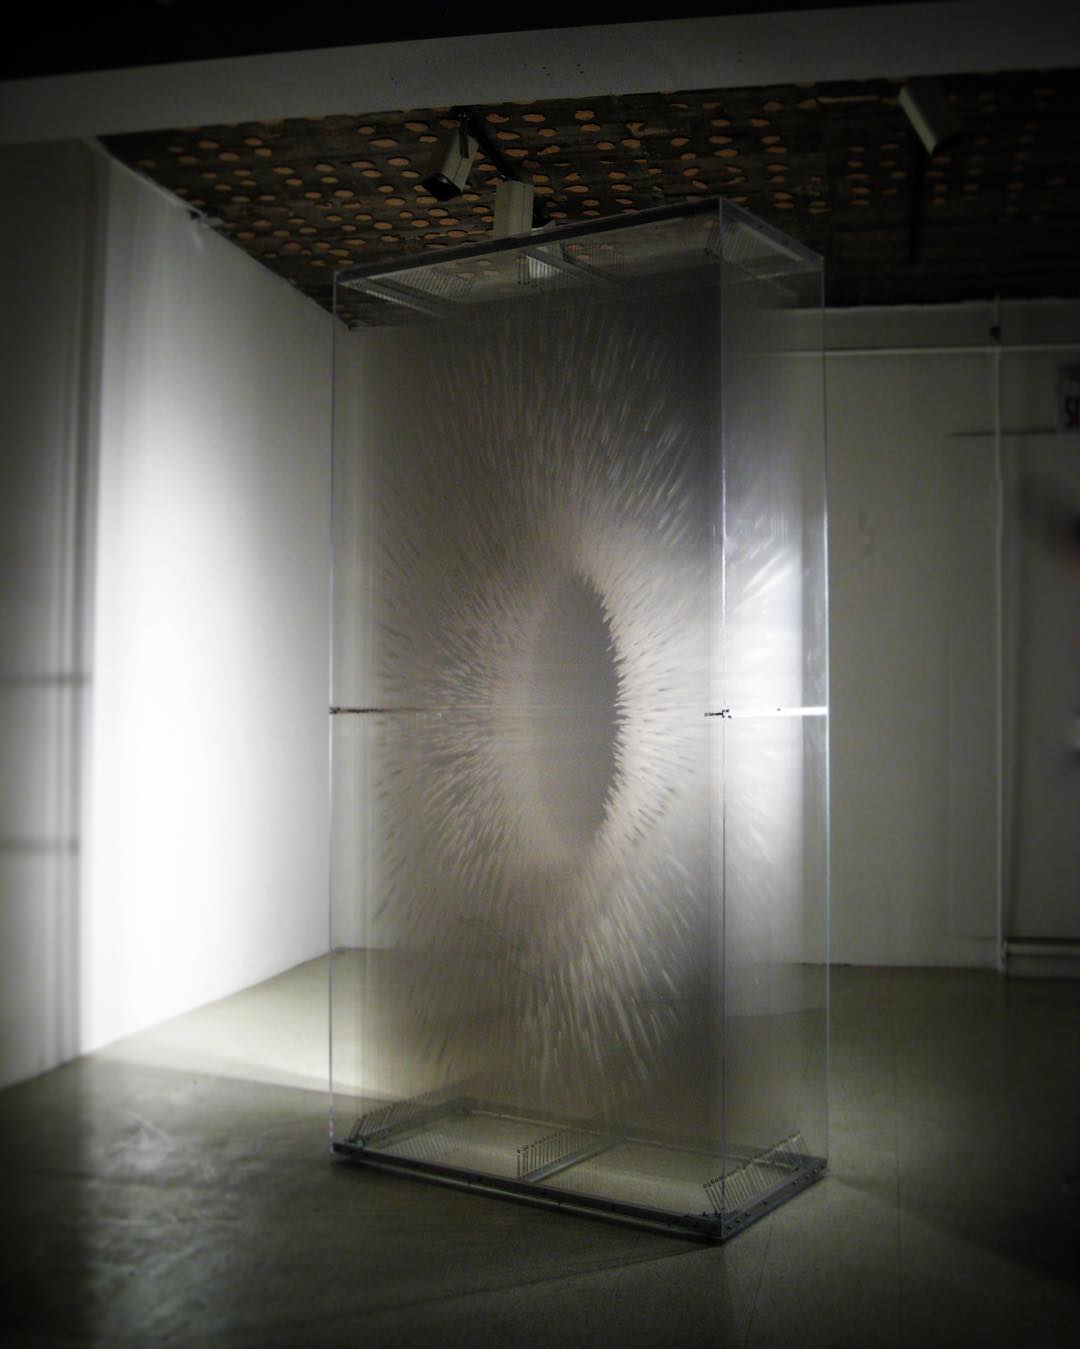 Emergence of Perception by David Spriggs. Painted layered transparencies. 2008